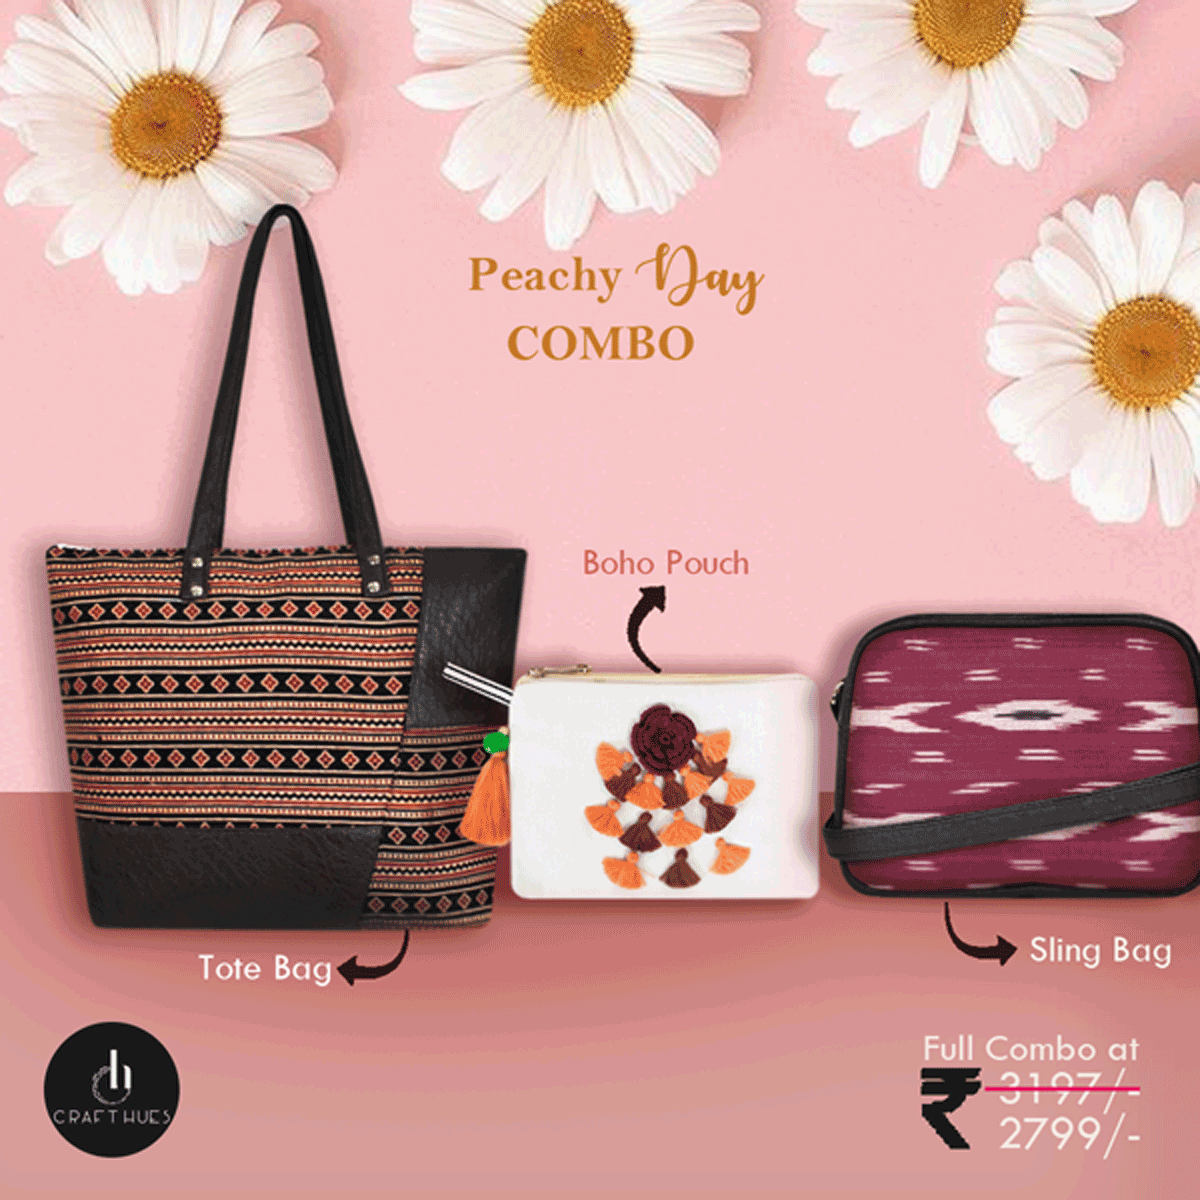 Peachy Day Bags Combo